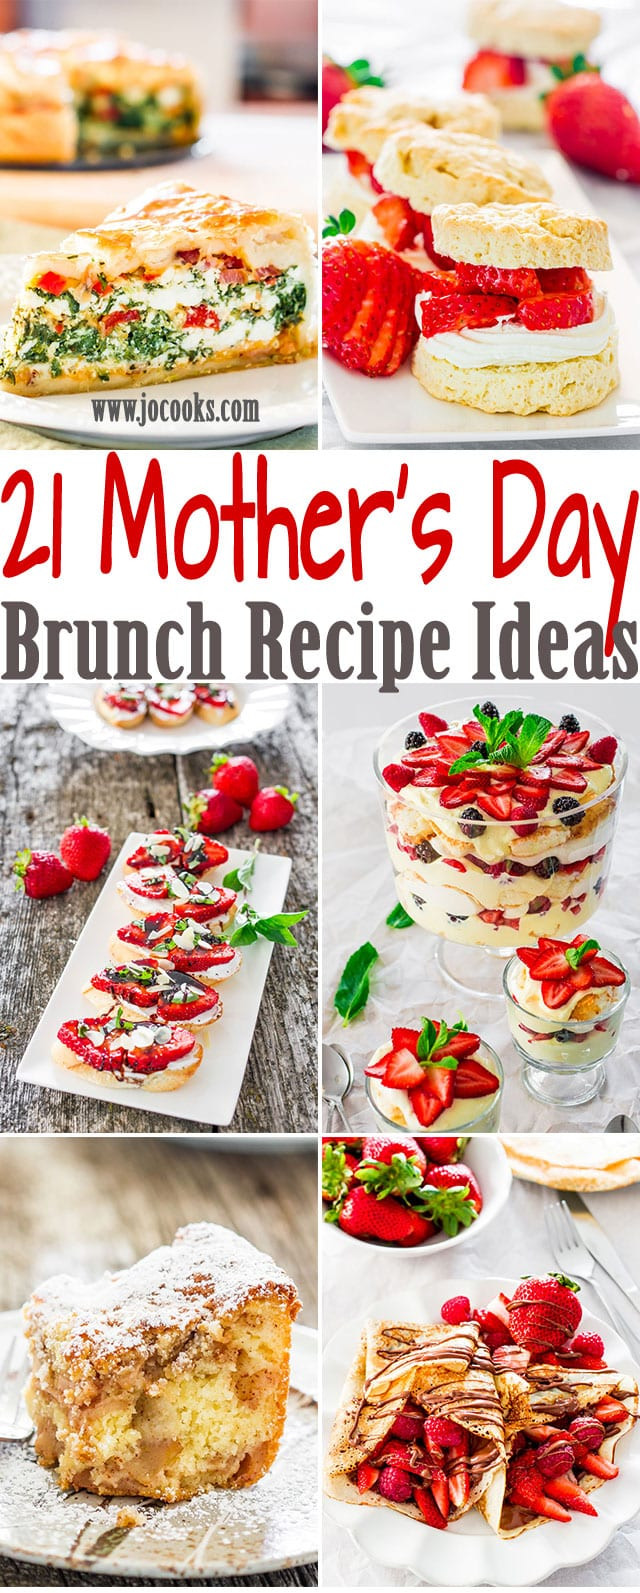 Breakfast Ideas For Mother's Day
 21 Mother s Day Brunch Recipe Ideas Your Mom Would Love